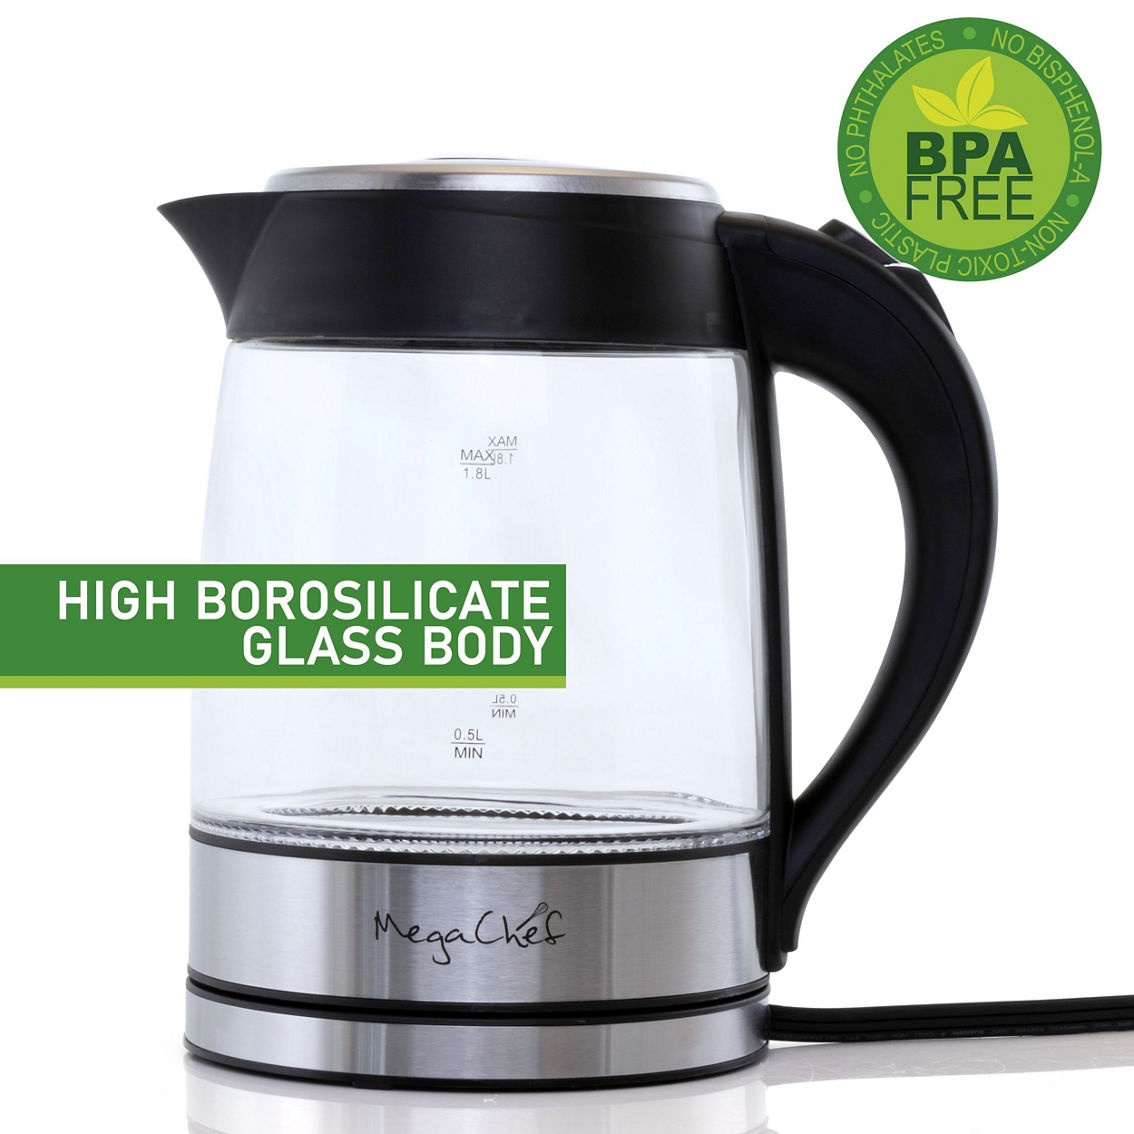 MegaChef 1.8Lt. Glass Body and Stainless Steel Electric Tea Kettle - Image 5 of 5